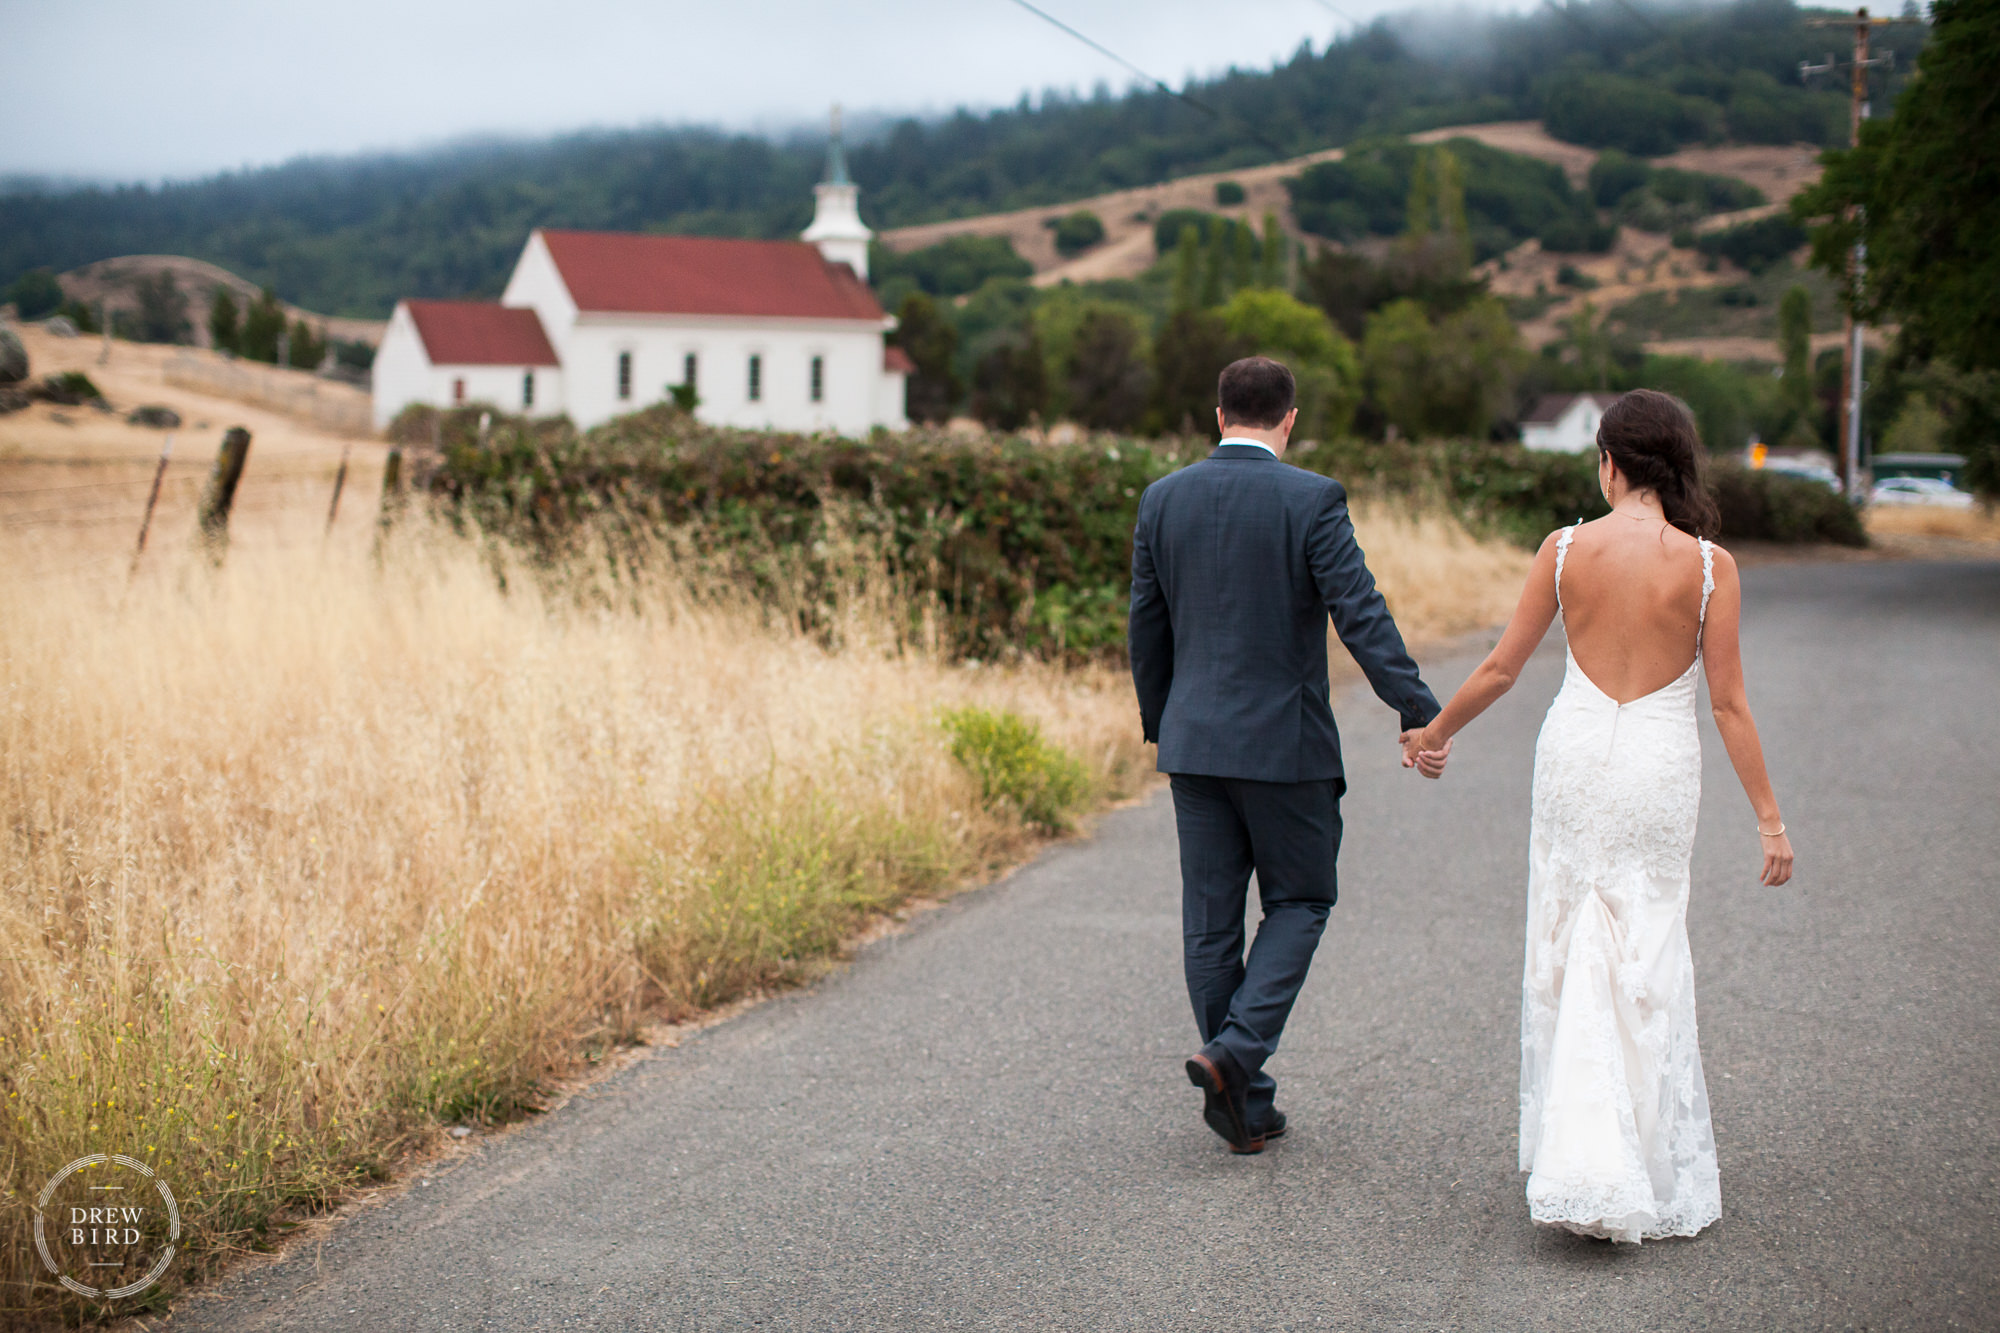 Bride and groom holding hands walking down country road. Rancho Nicasio rustic wedding venue in Marin County, California.